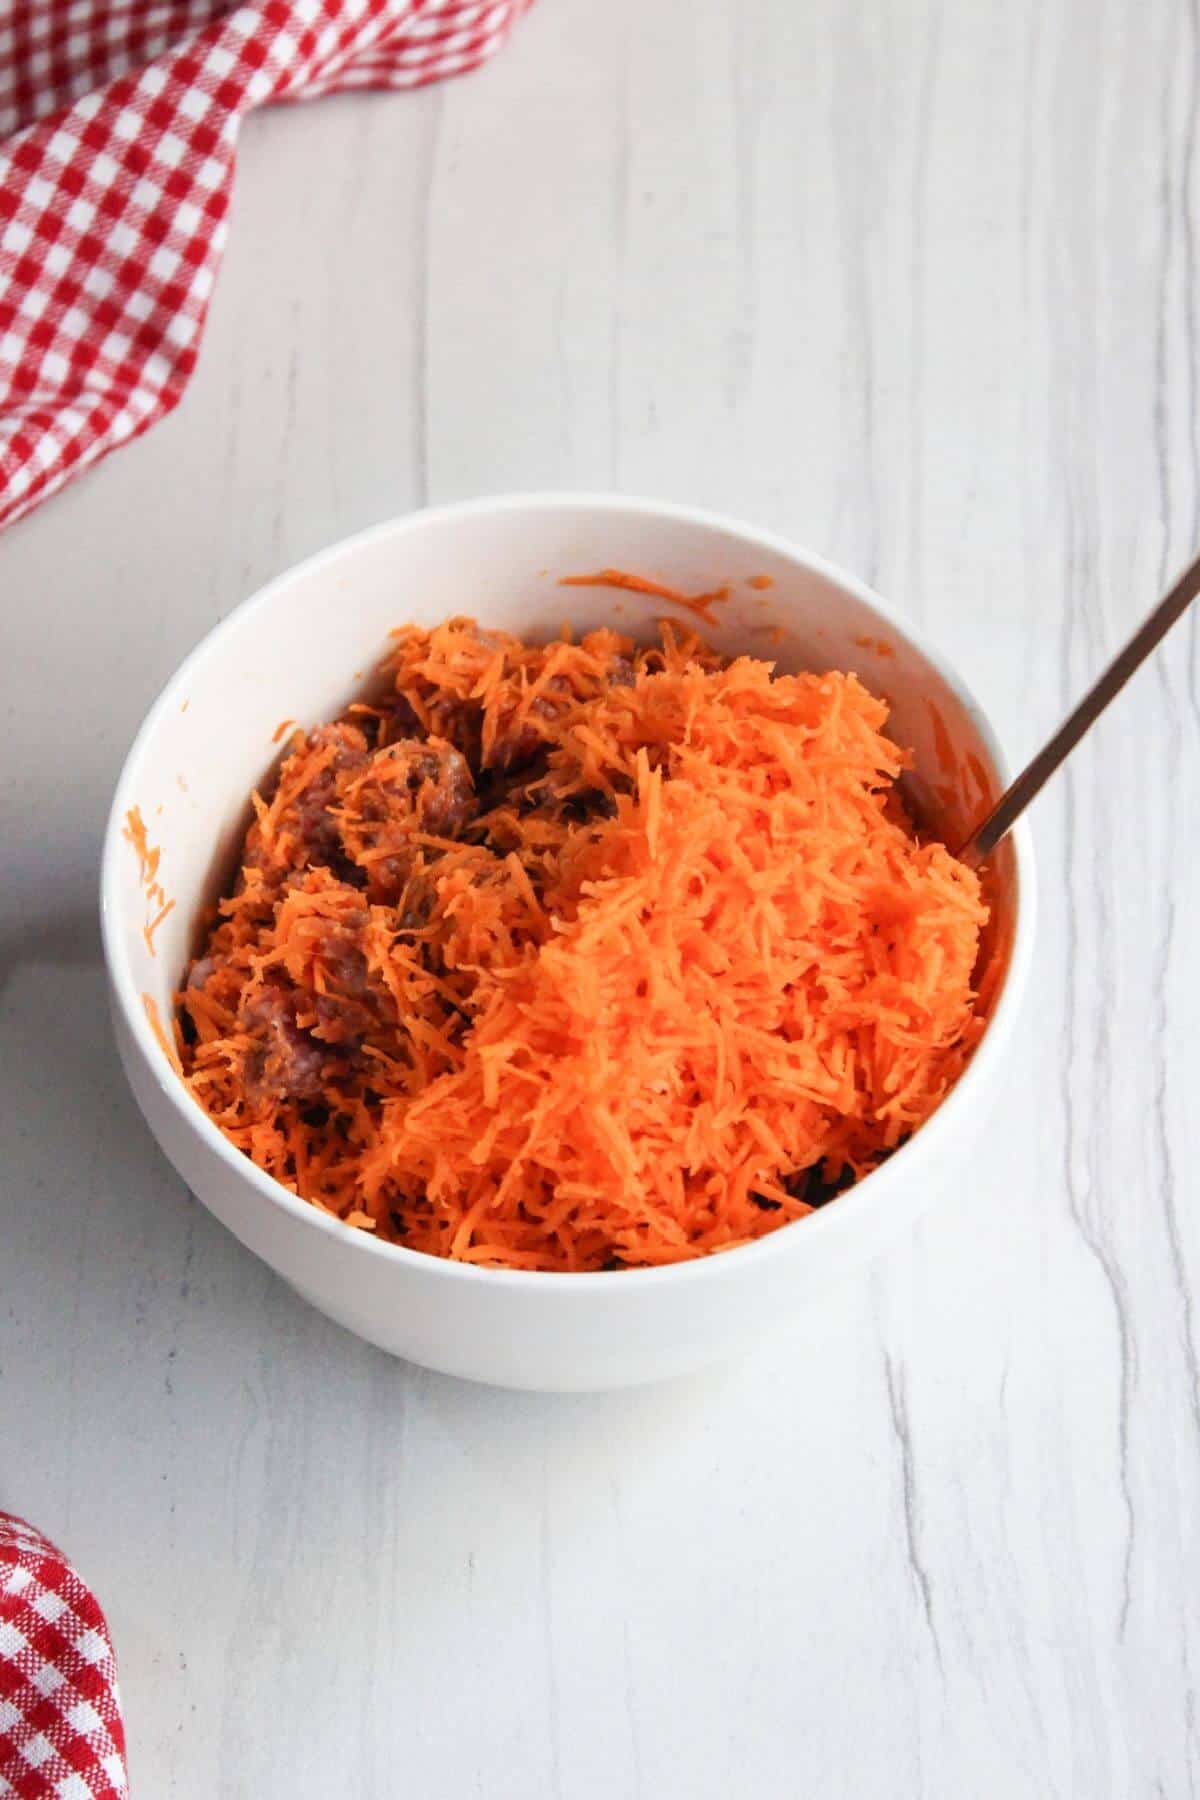 Carrots added to meat in a white bowl with a spoon.